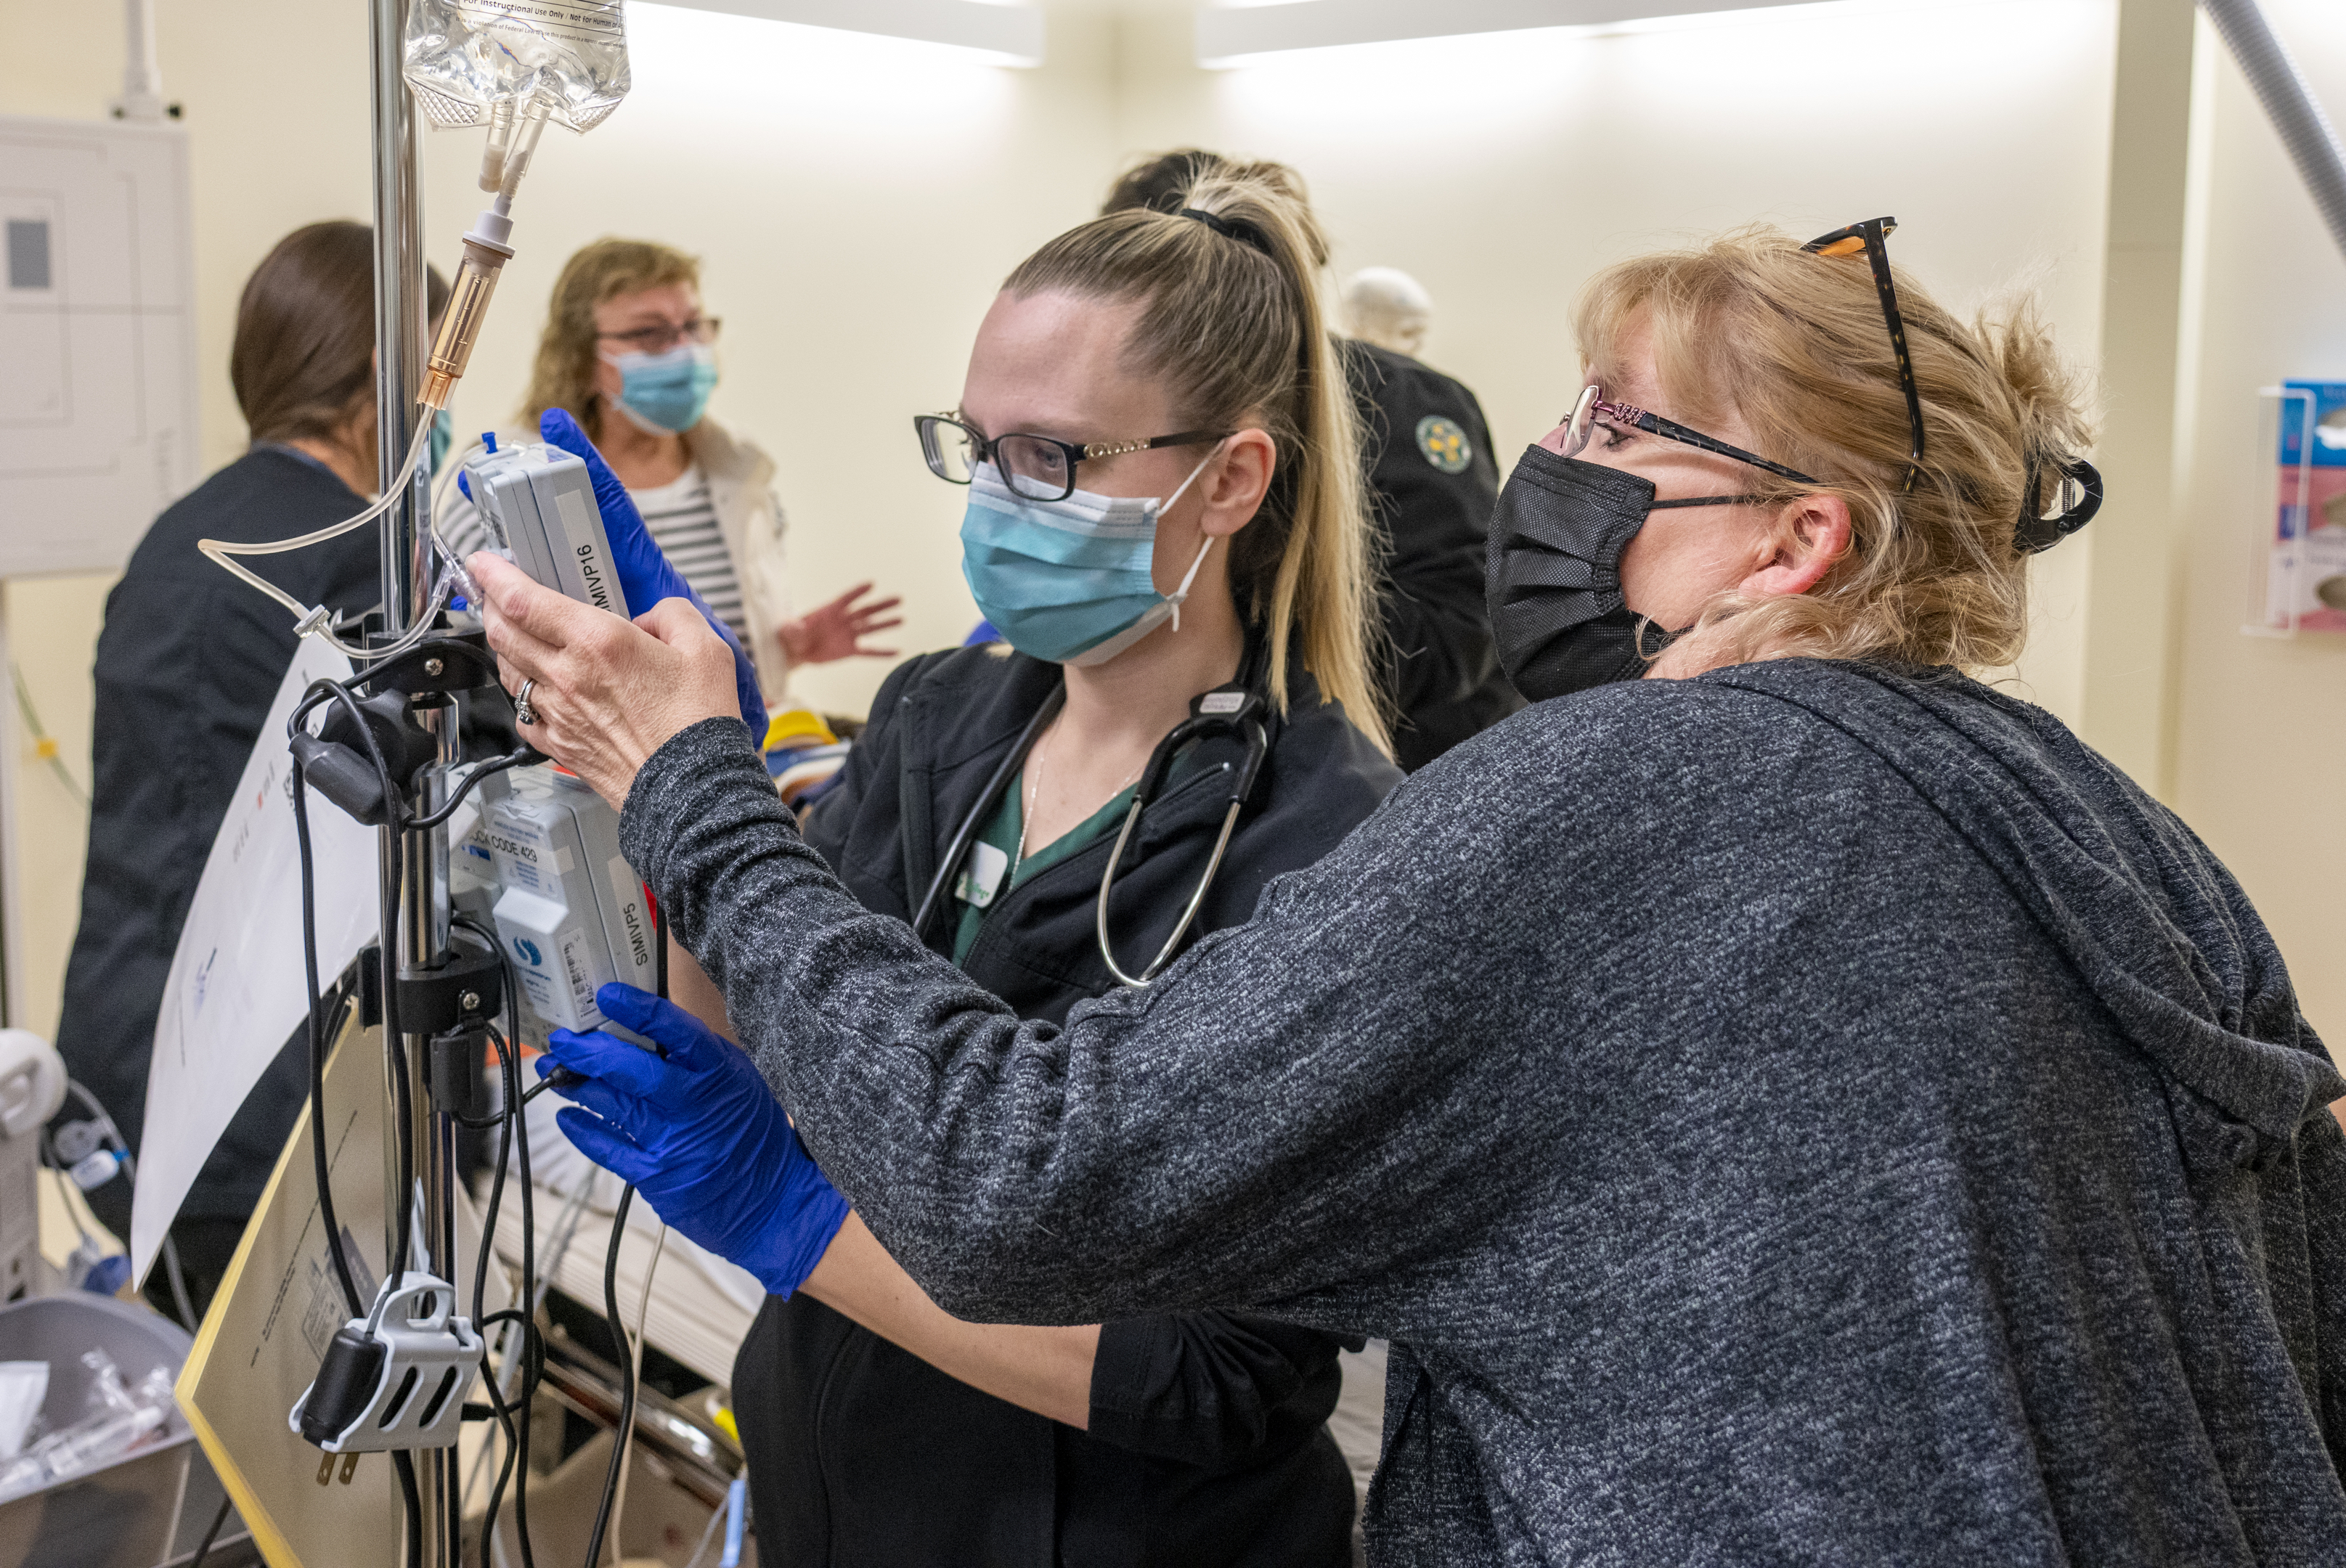 Healthcare students use real, state-of-the-art medical equipment